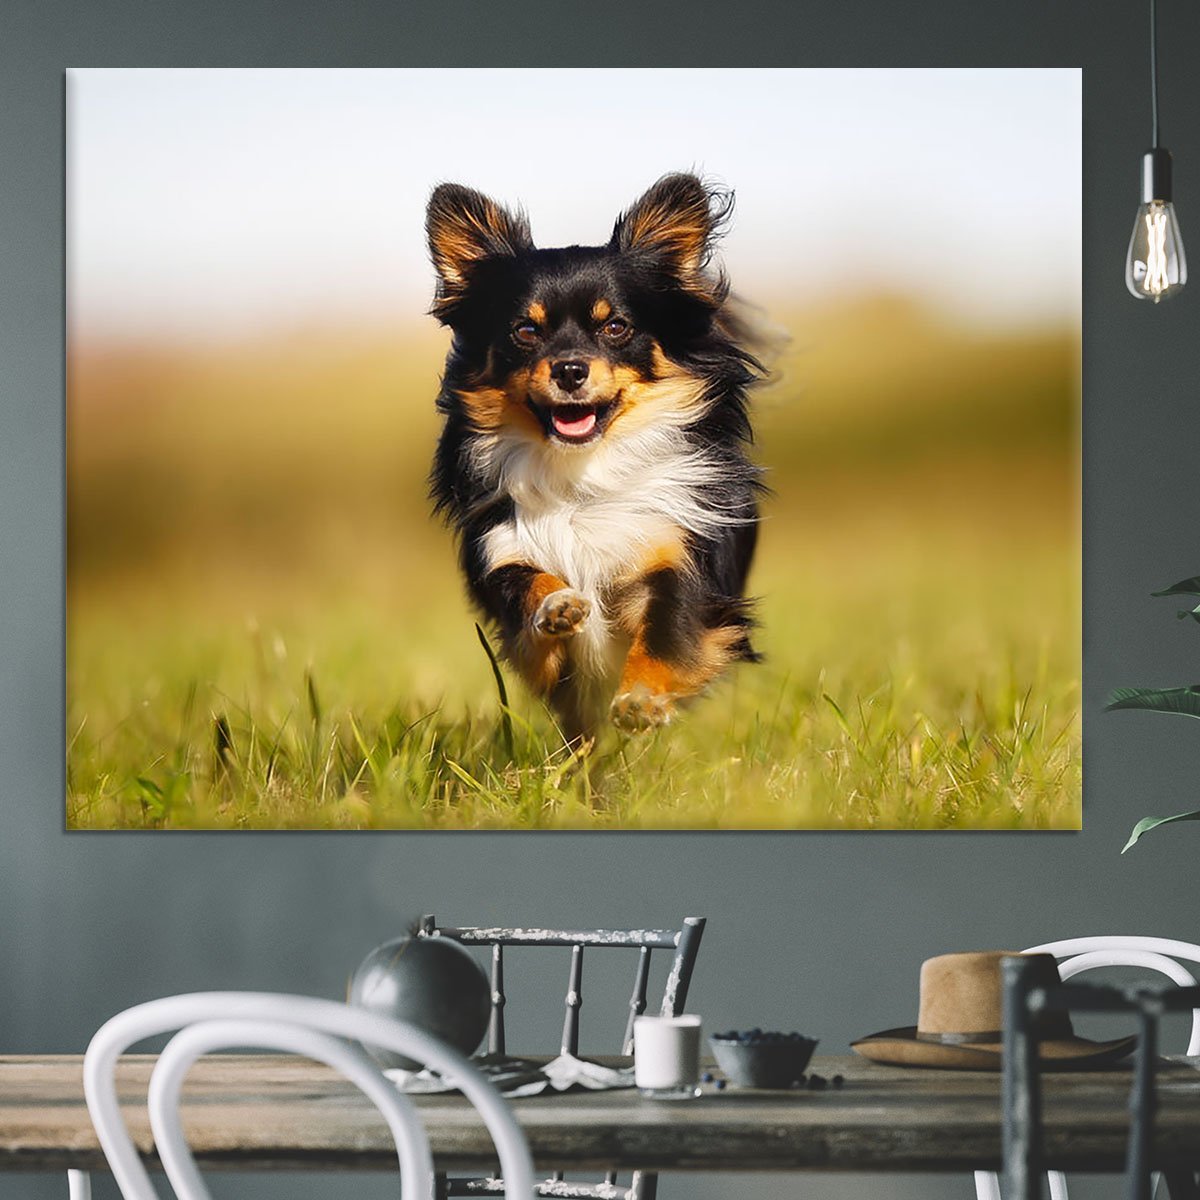 Chihuahua dog running towards the camera in a grass field Canvas Print or Poster